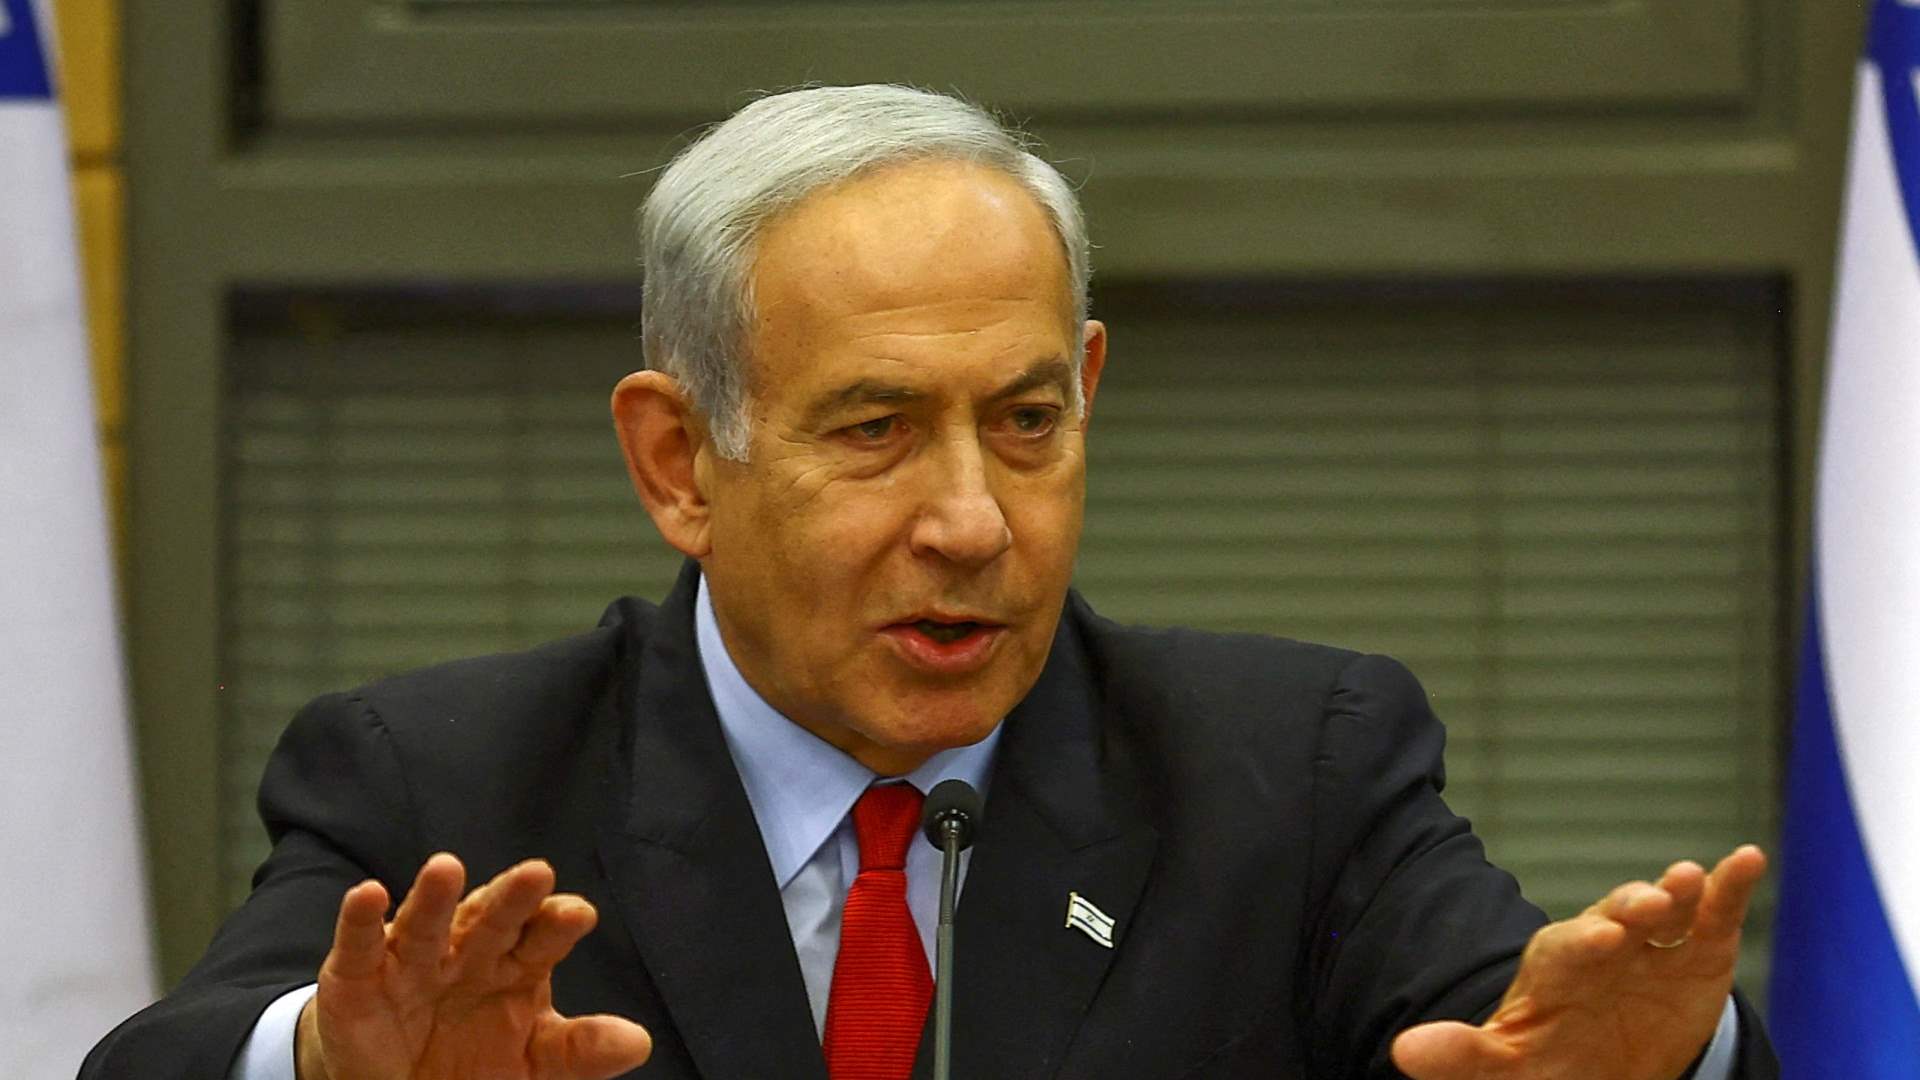 Netanyahu says European countries&#39; recognition of Palestinian state is a &#39;reward for terrorism&#39;